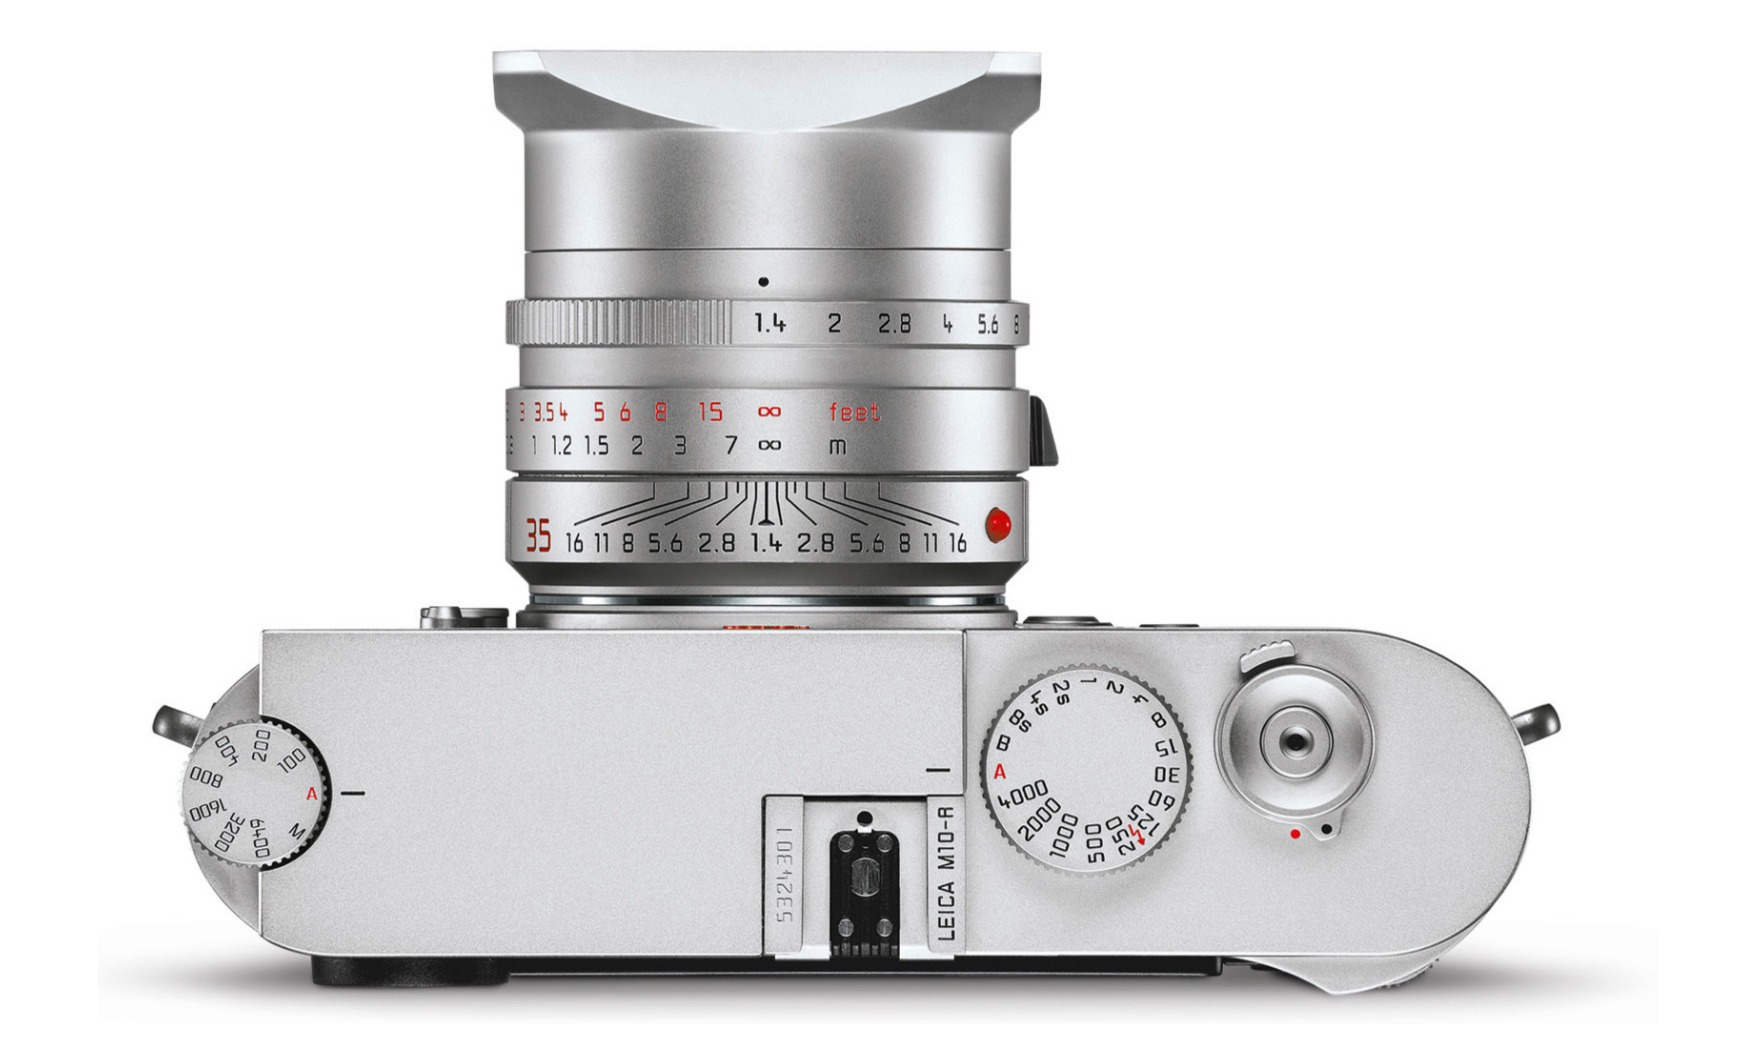 Silver Leica M10-R camera now in stock in the US for the first time